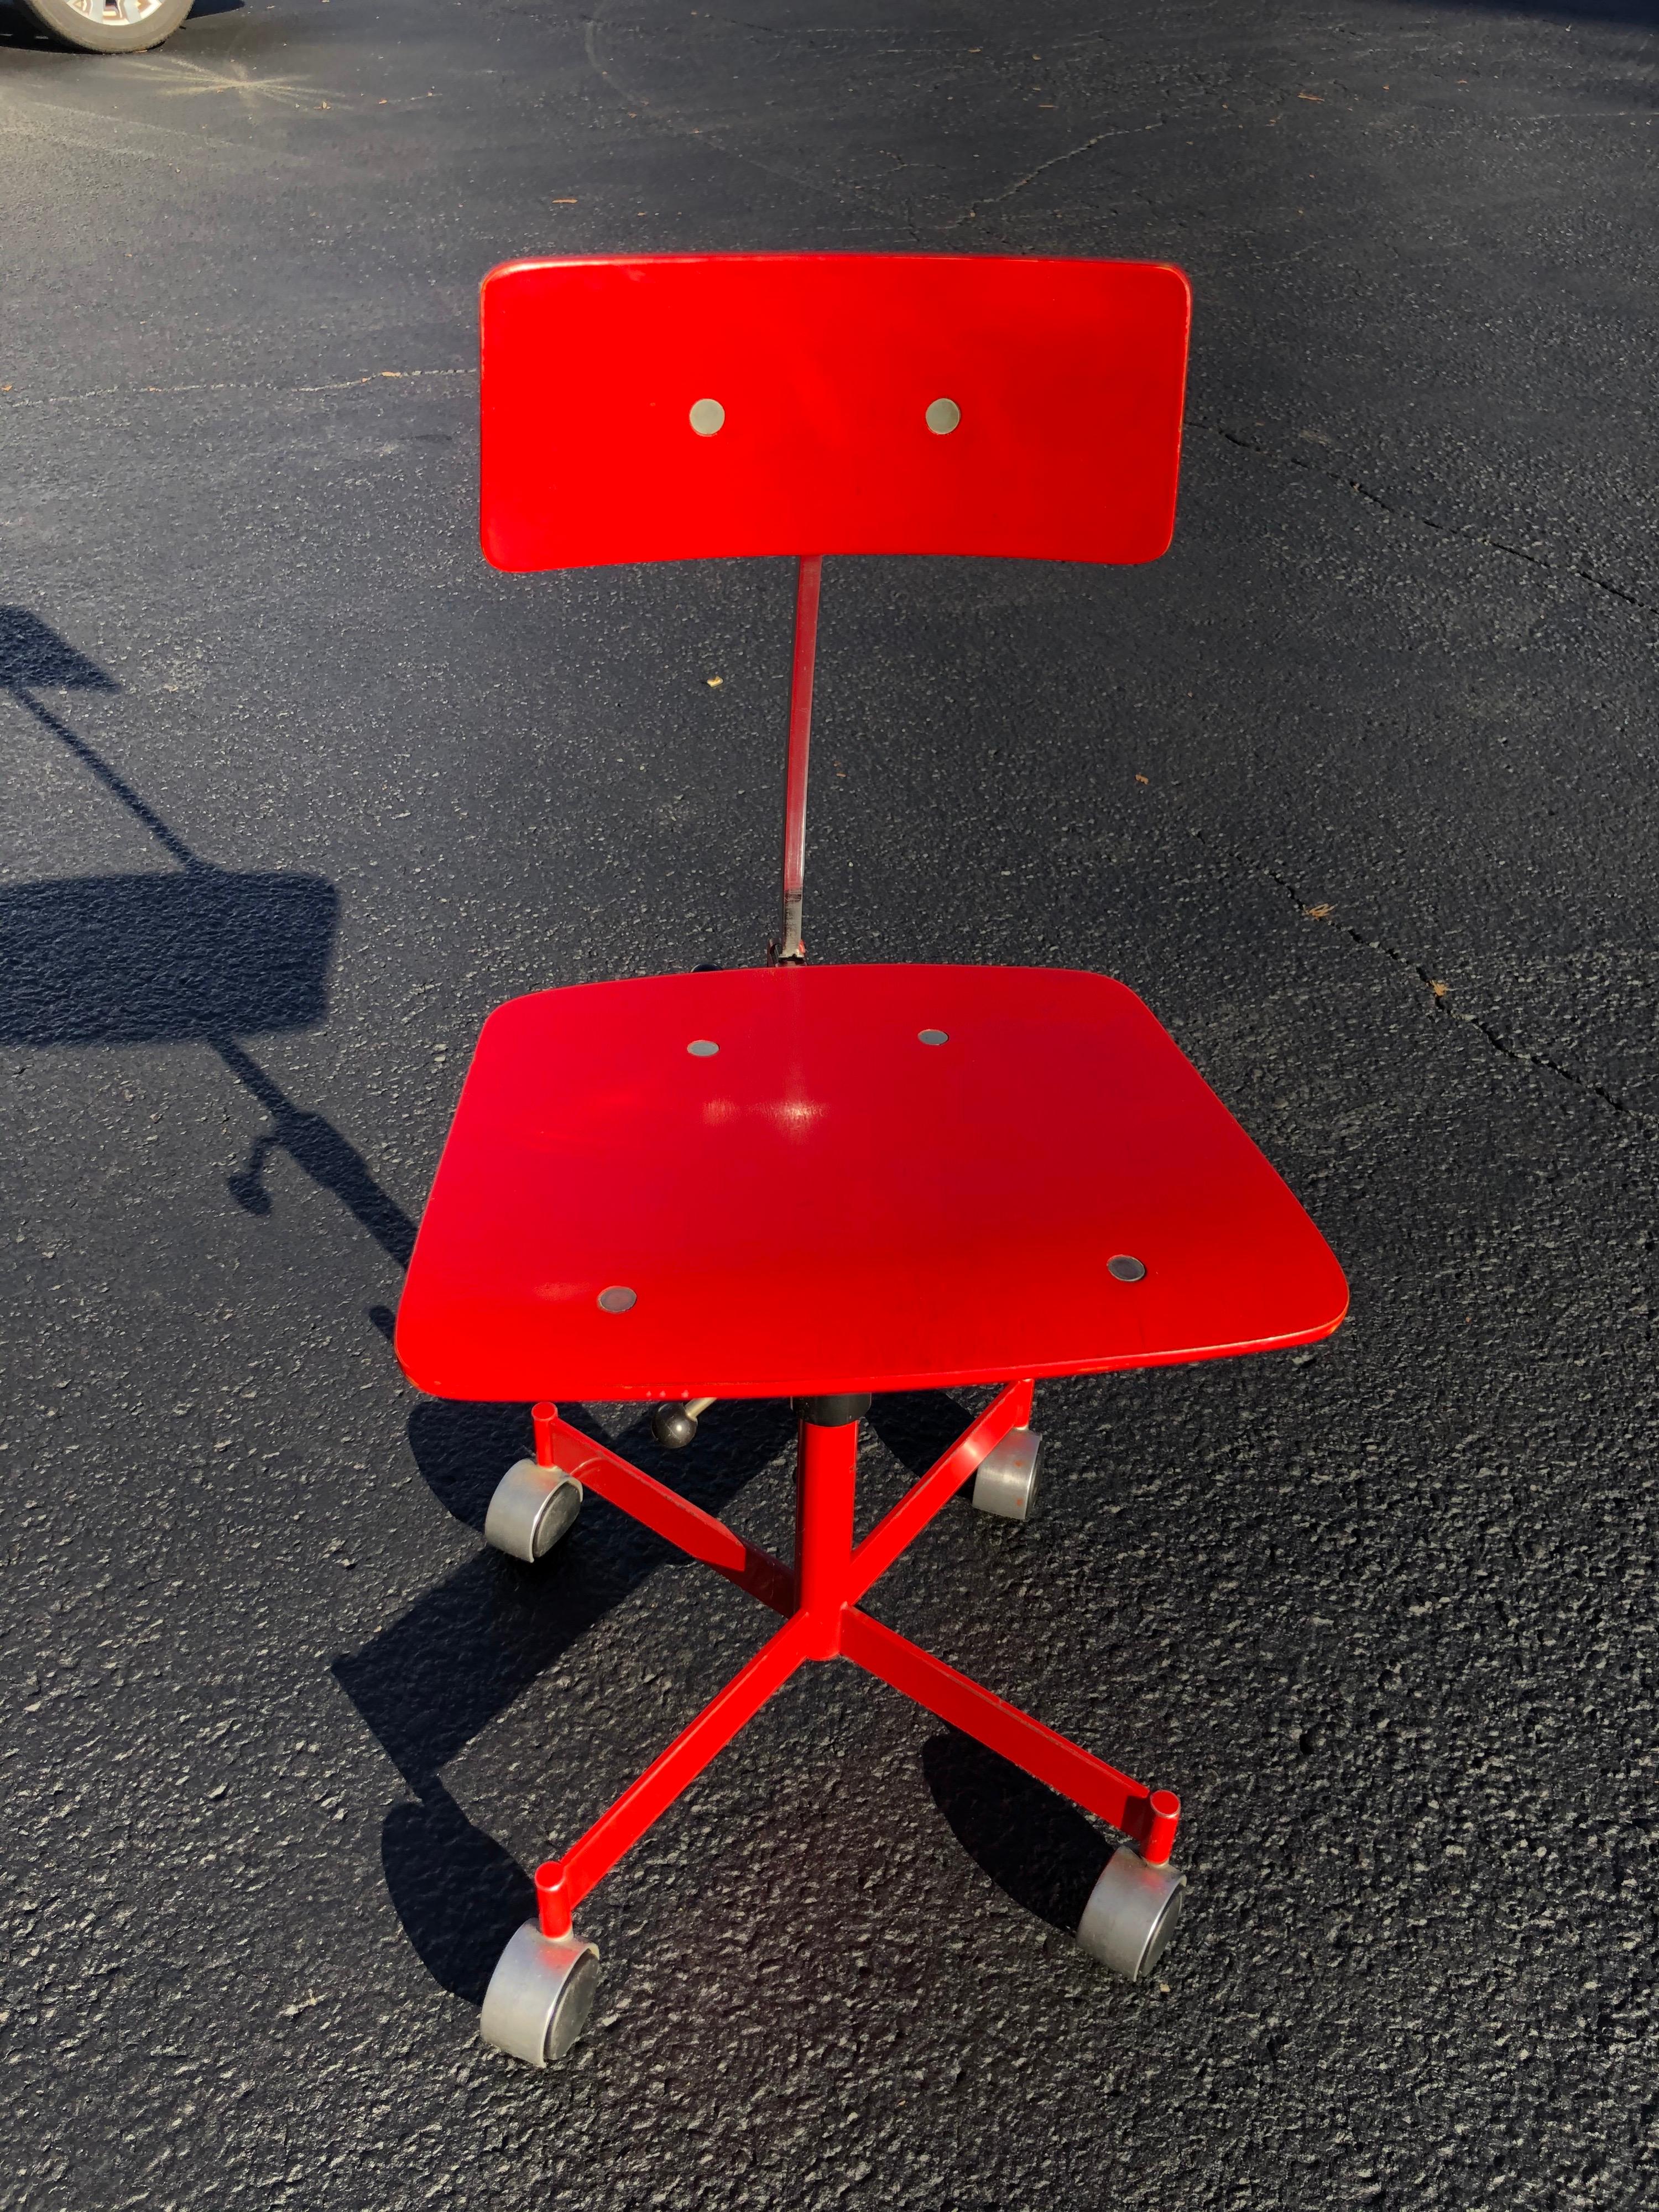 1960s vintage Jørgen Rasmussen Danish Modern Kevi Model 311 task chair in red.
Excellent condition. Perfect for the Danish modern office or for a childs desk chair. Adjustable seat height and back support. Customize your comfort.